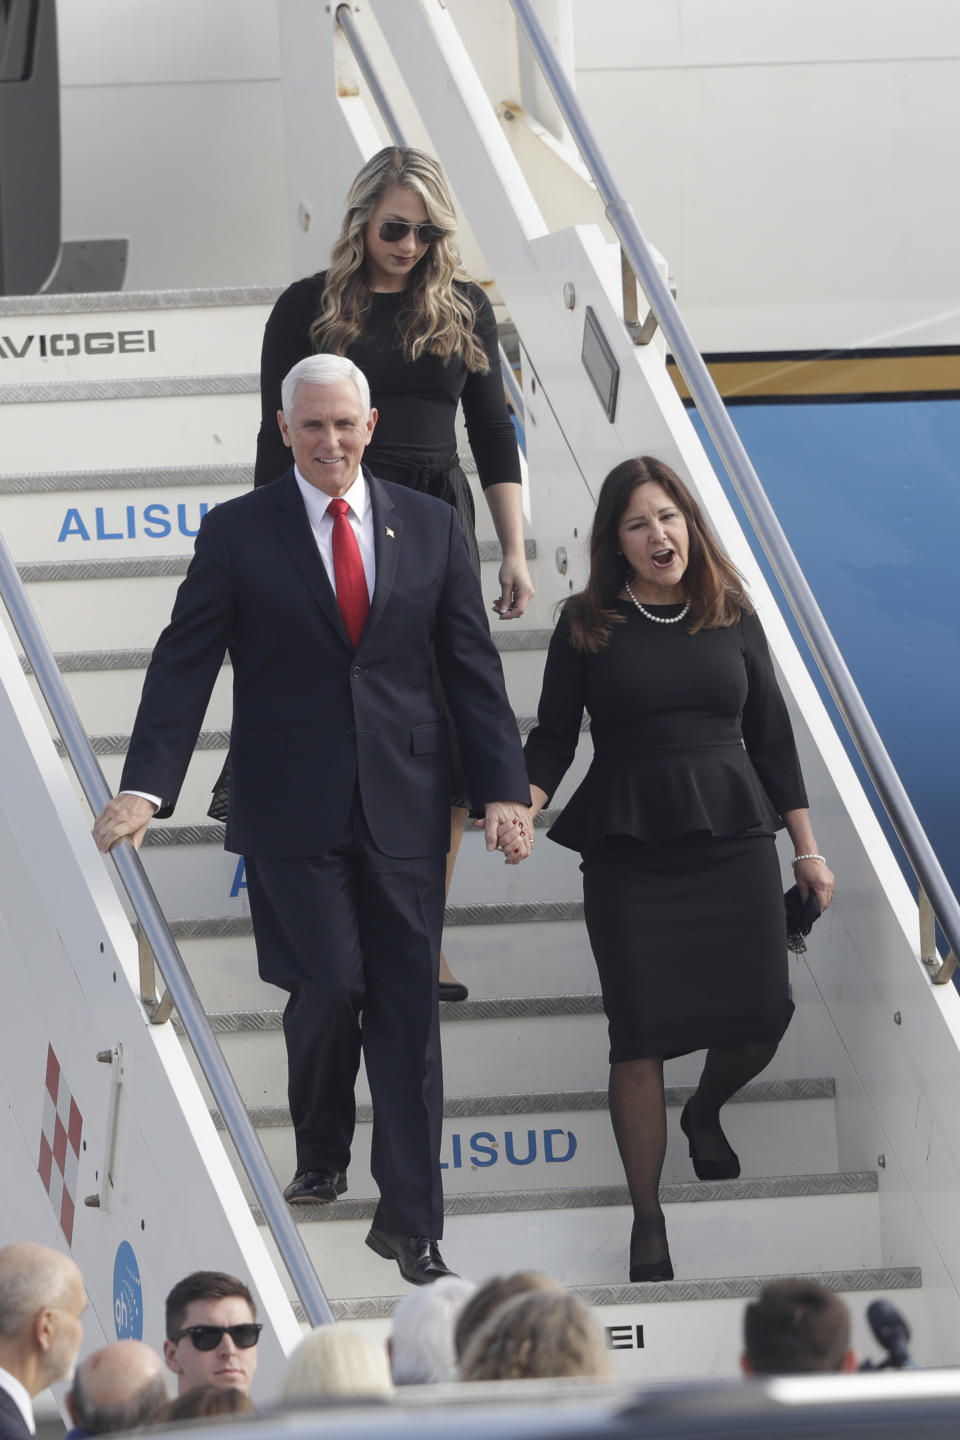 U.S. Vice President Mike Pence and his wife Karen hold hands as they disembark from Air Force Two upon their arrival at Rome's Ciampino airport, Friday, Jan. 24, 2020. Pence is scheduled to meet later with Pope Francis at the Vatican. (AP Photo/Gregorio Borgia)